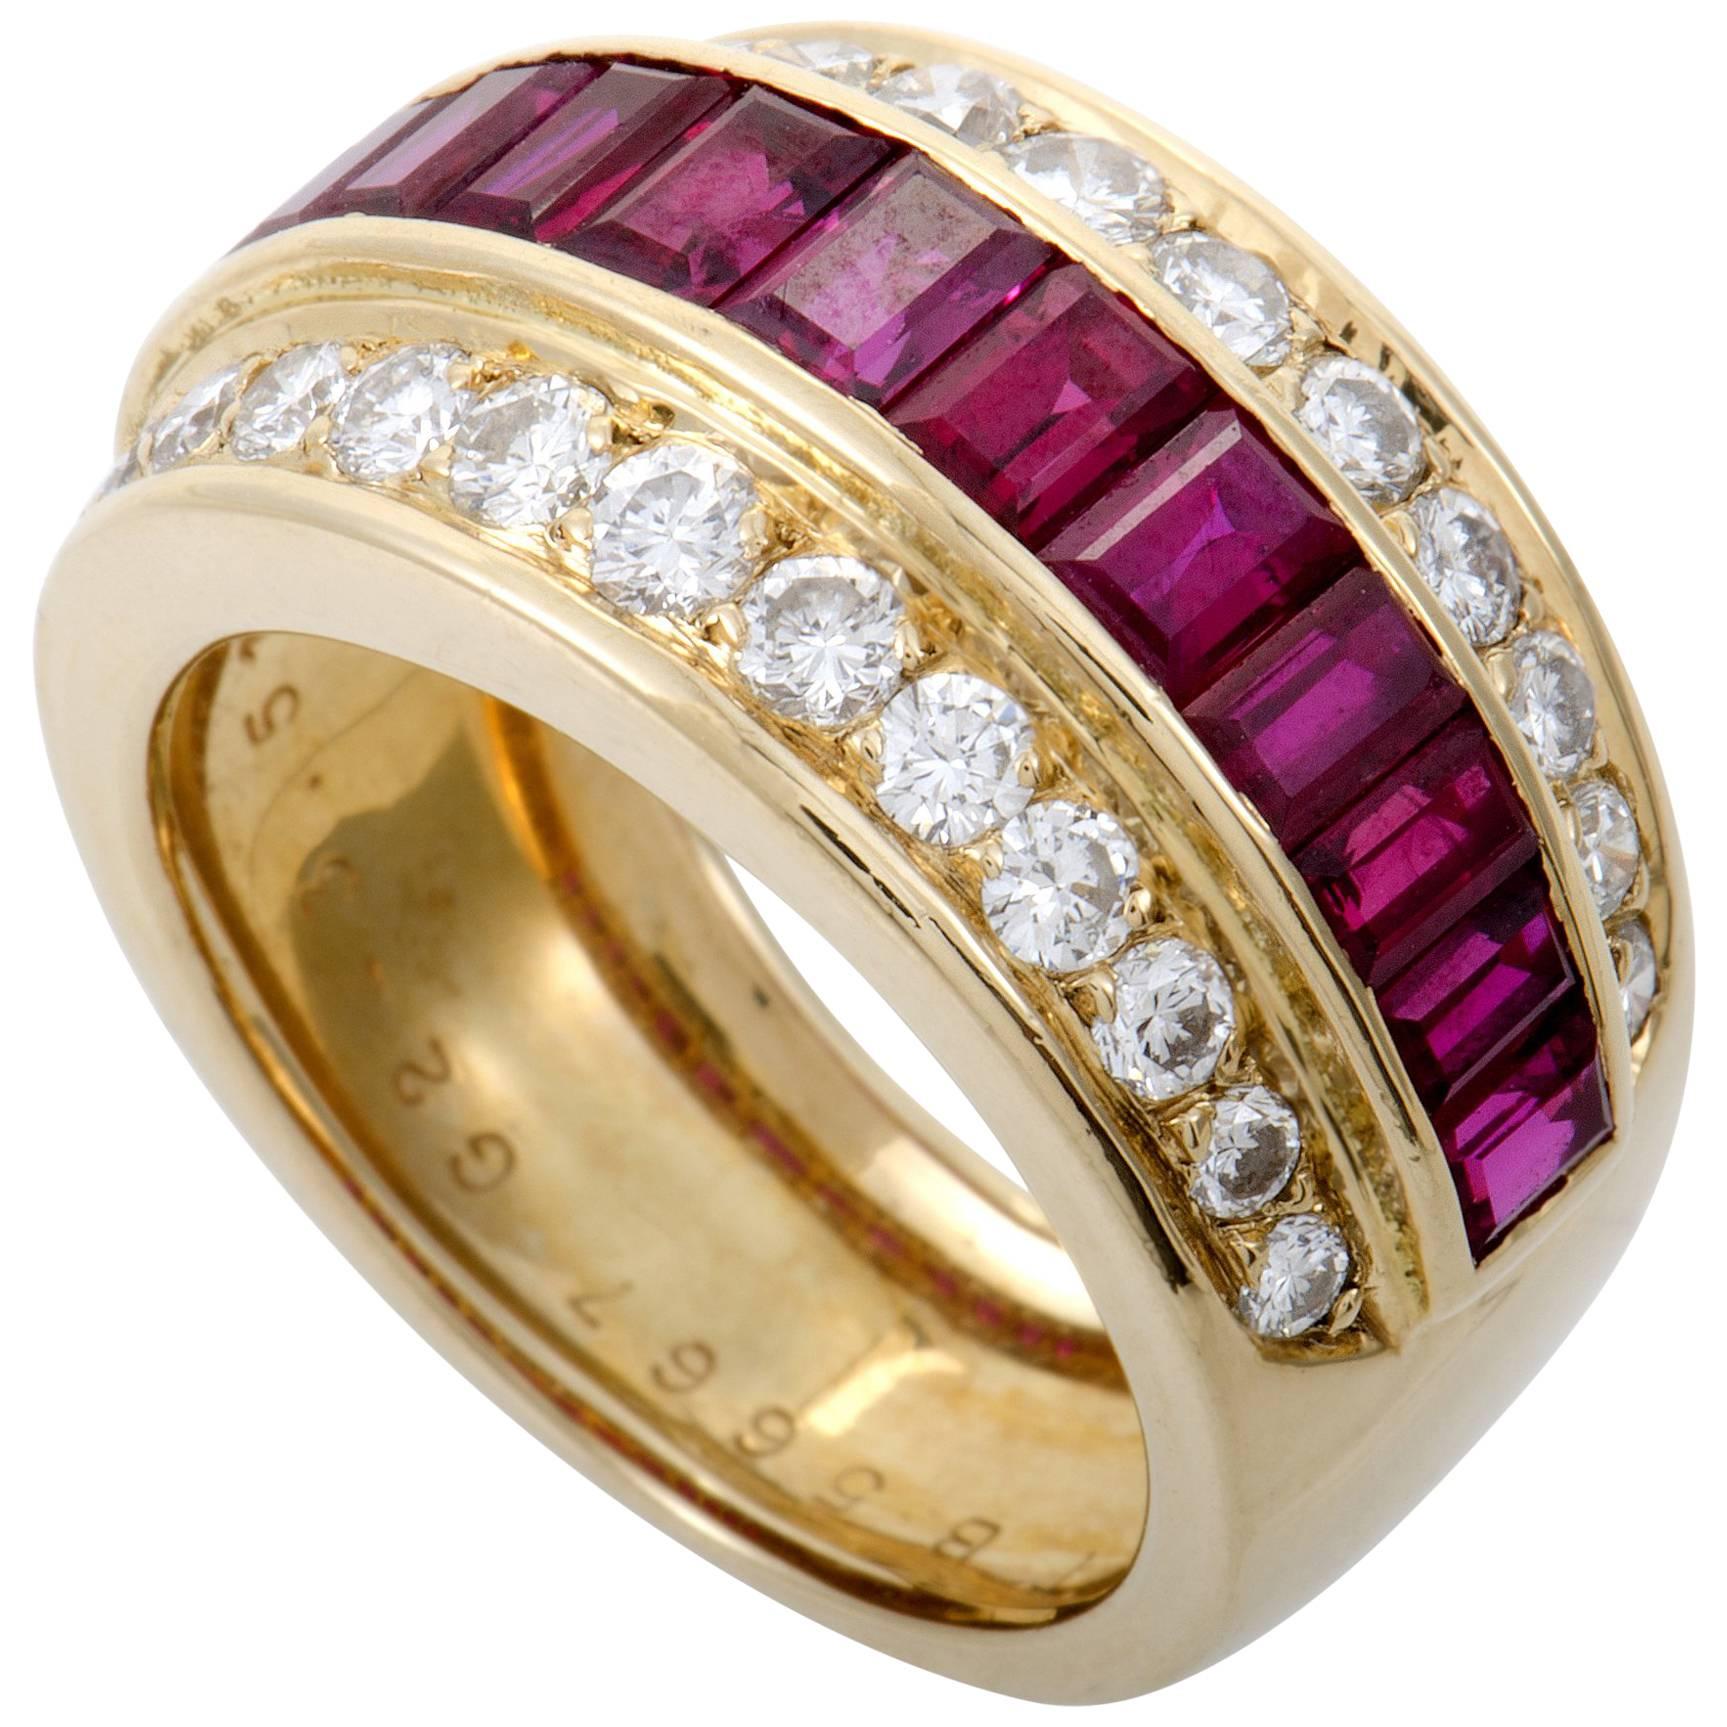 Van Cleef & Arpels Diamond Yellow Gold Invisibly Set Ruby Band Ring